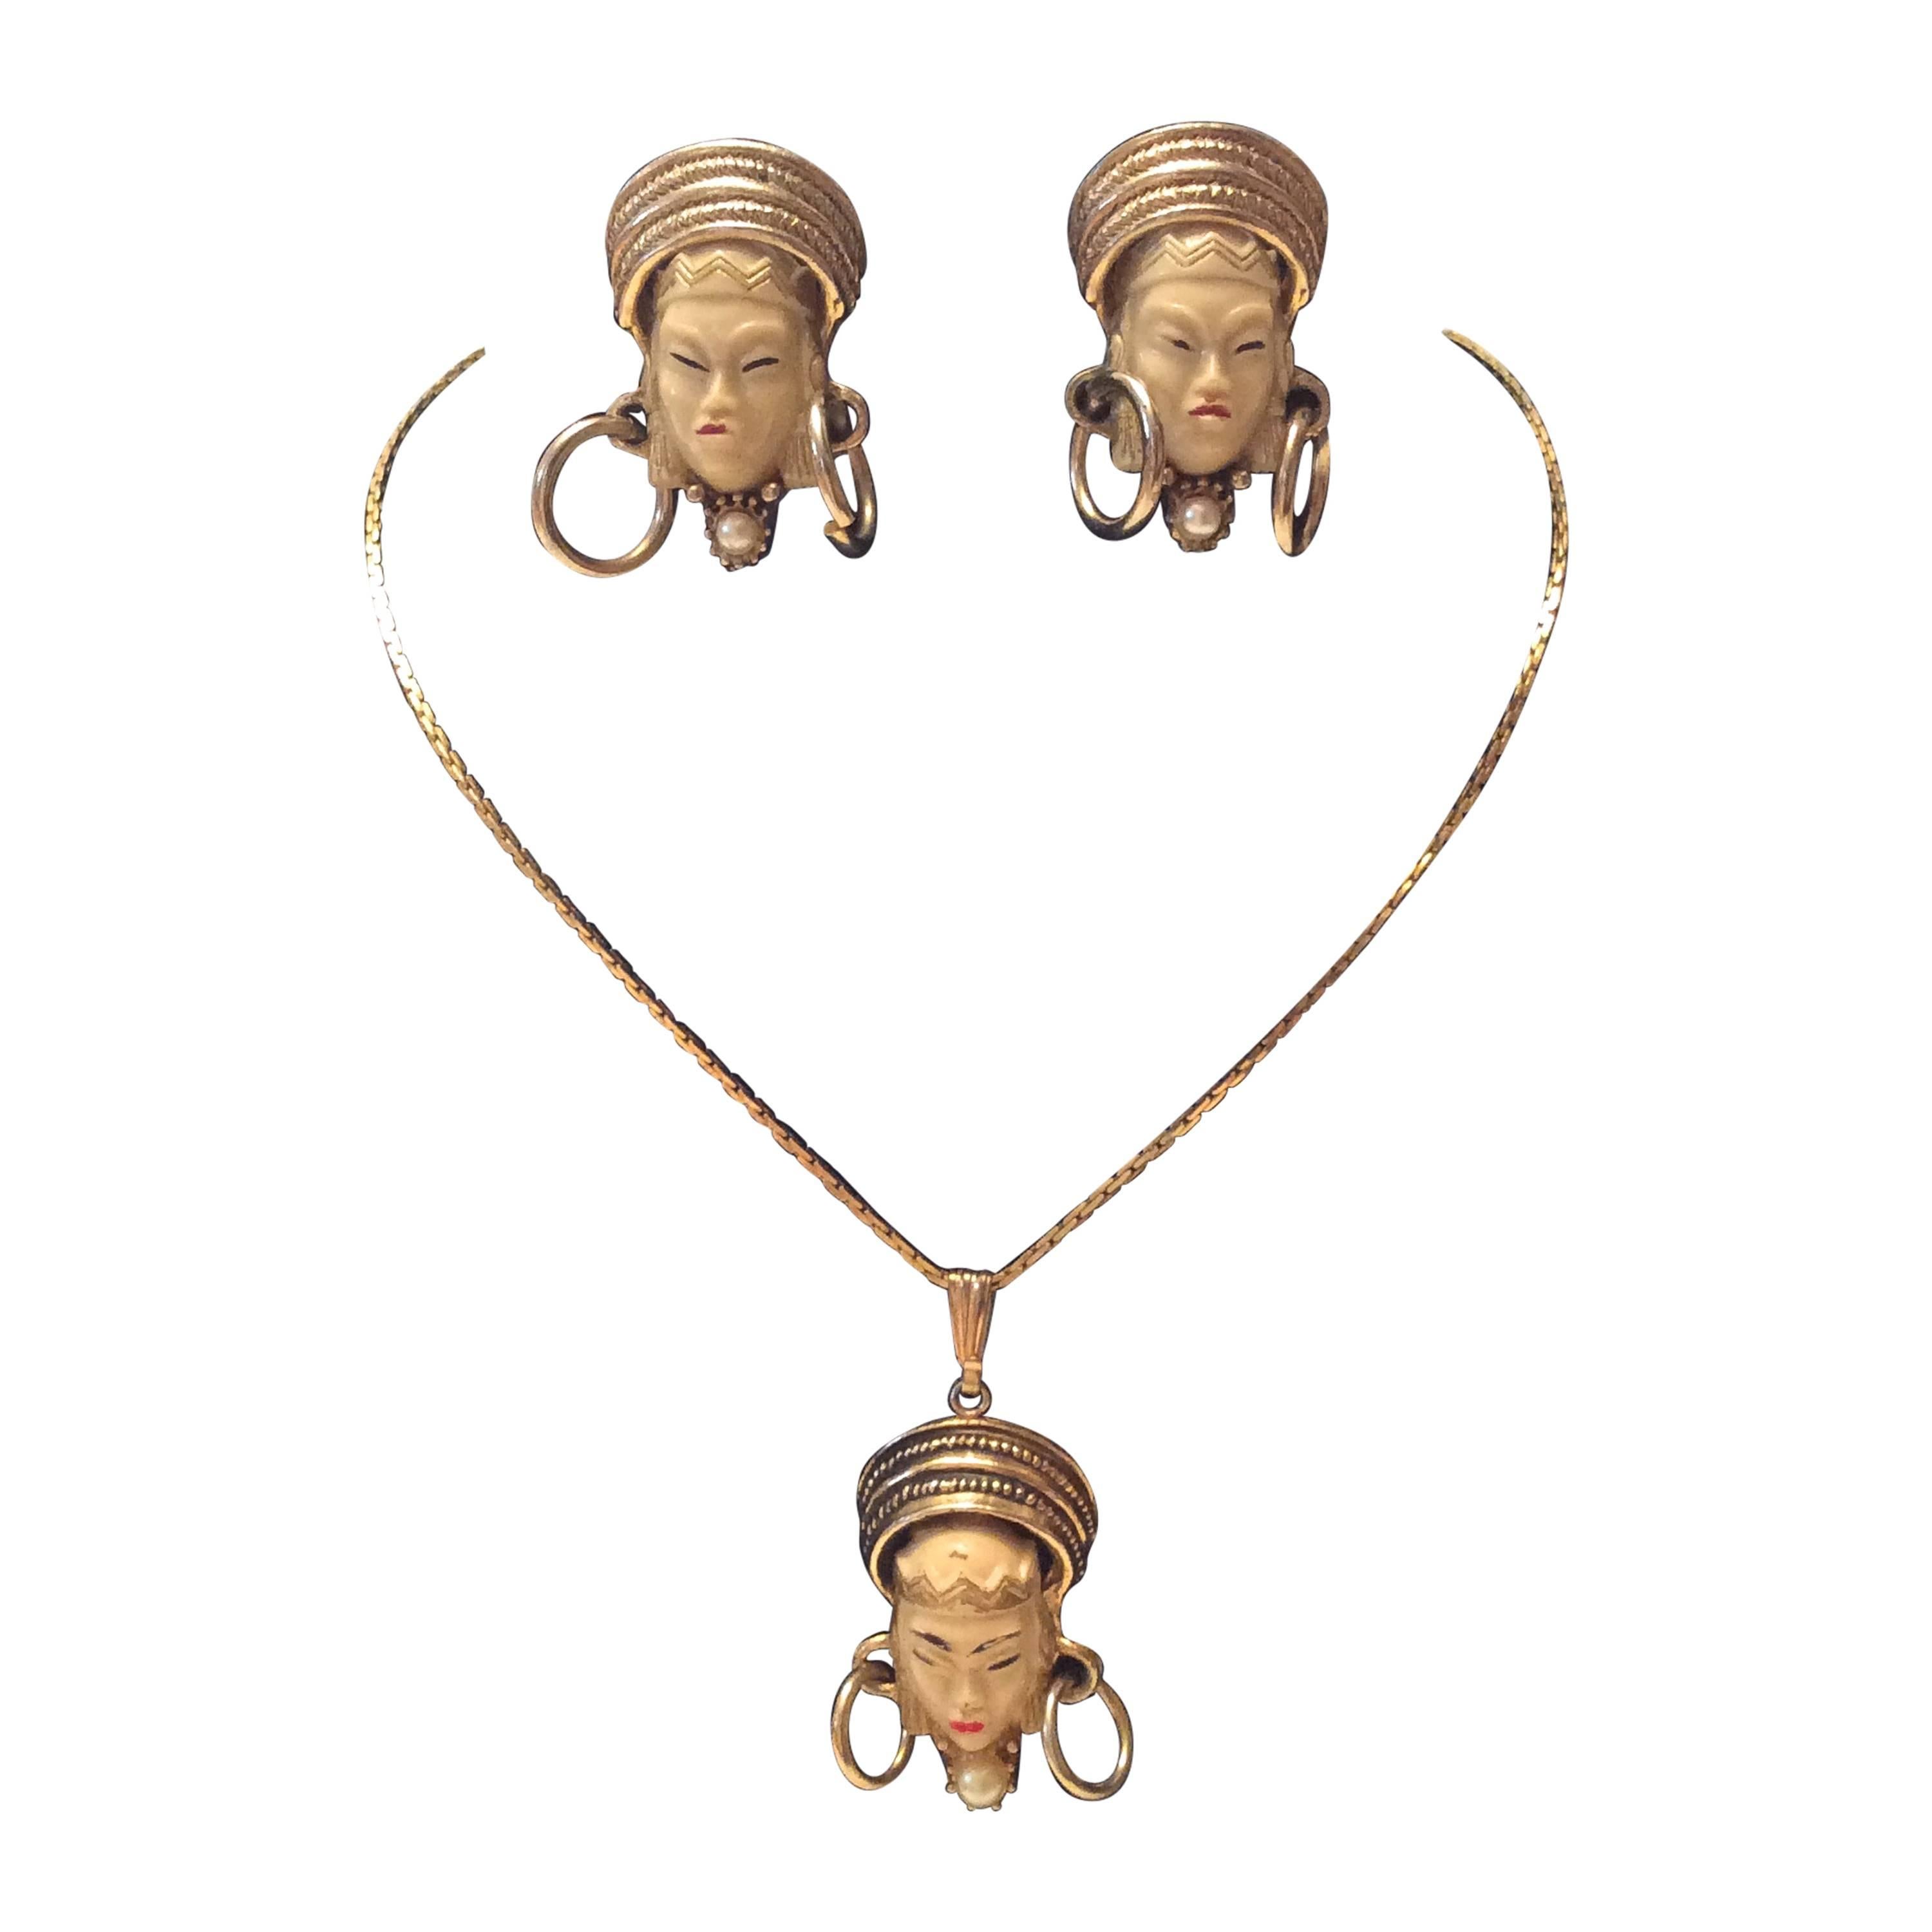 Vintage Selro Selini Asian Faced Gold Tone Necklace and Earrings For Sale